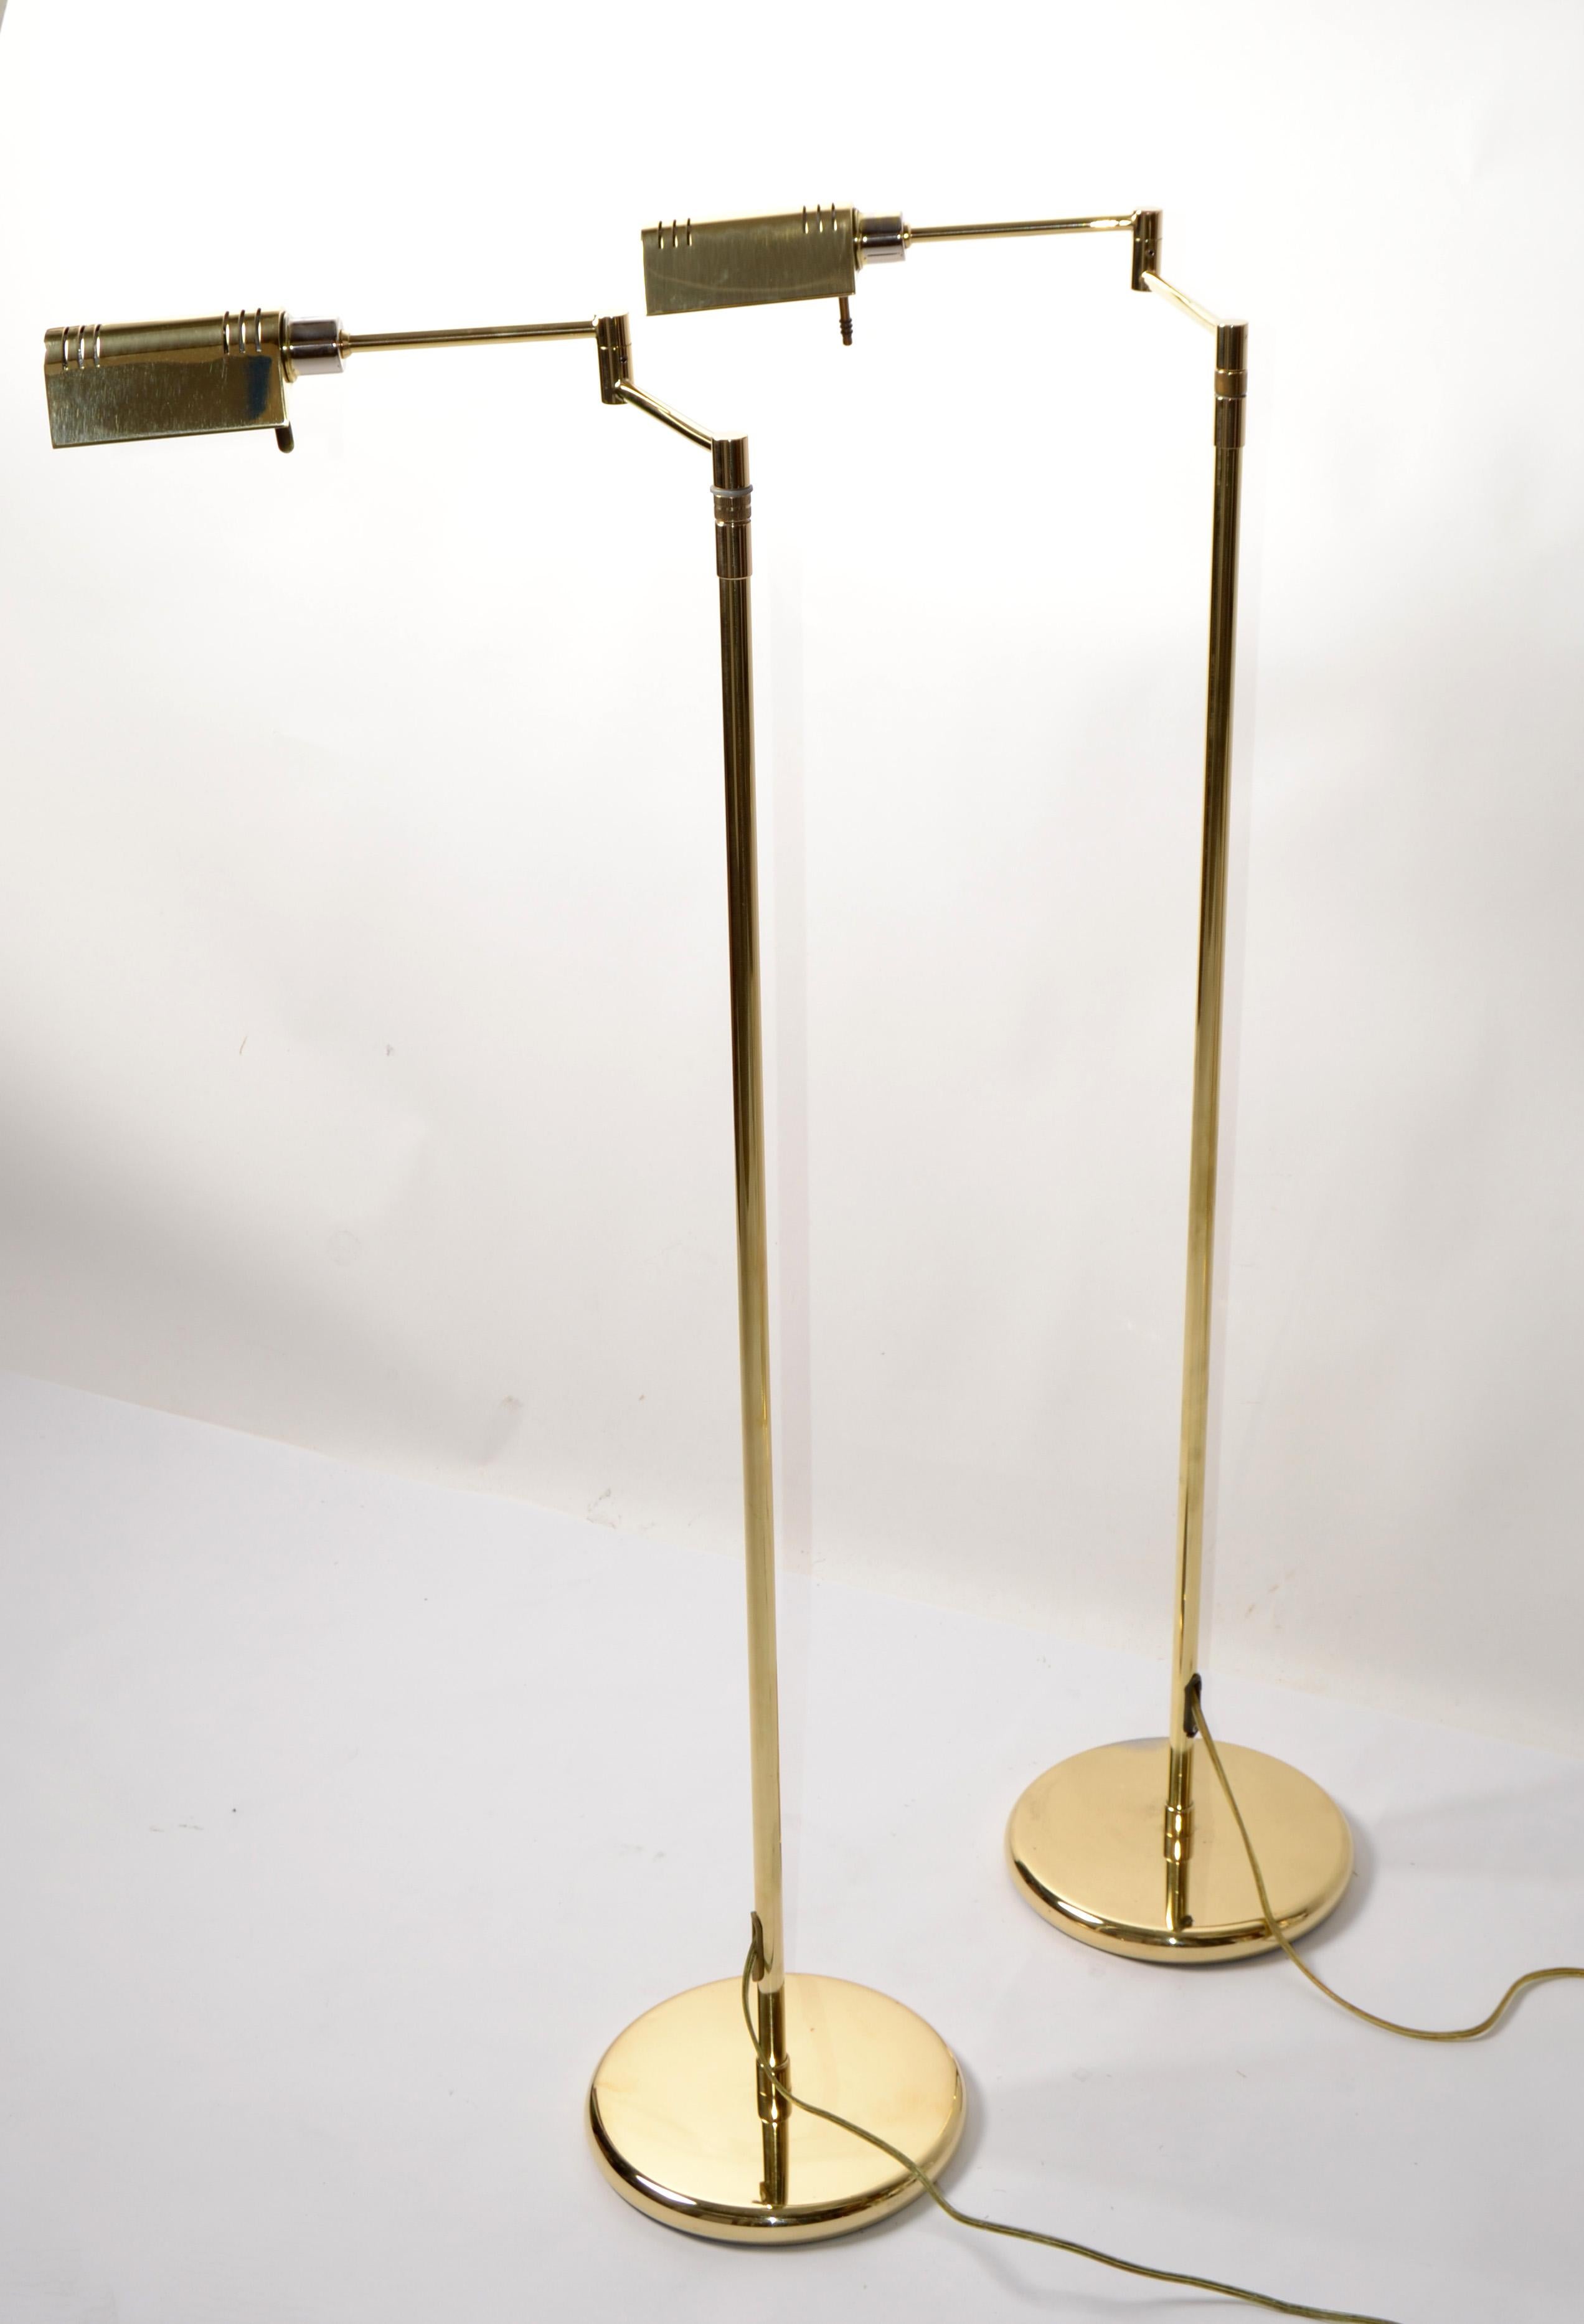 Pair of polished Holtkoetter Leuchten (Holkoetter Leuchten of Germany) designed in the Style of the Bauhaus Period and made in circa Beginning of 1980s.  
Reading pharmacy lamps swing arm floor lamps next to Your favorite Recliner or Lounge